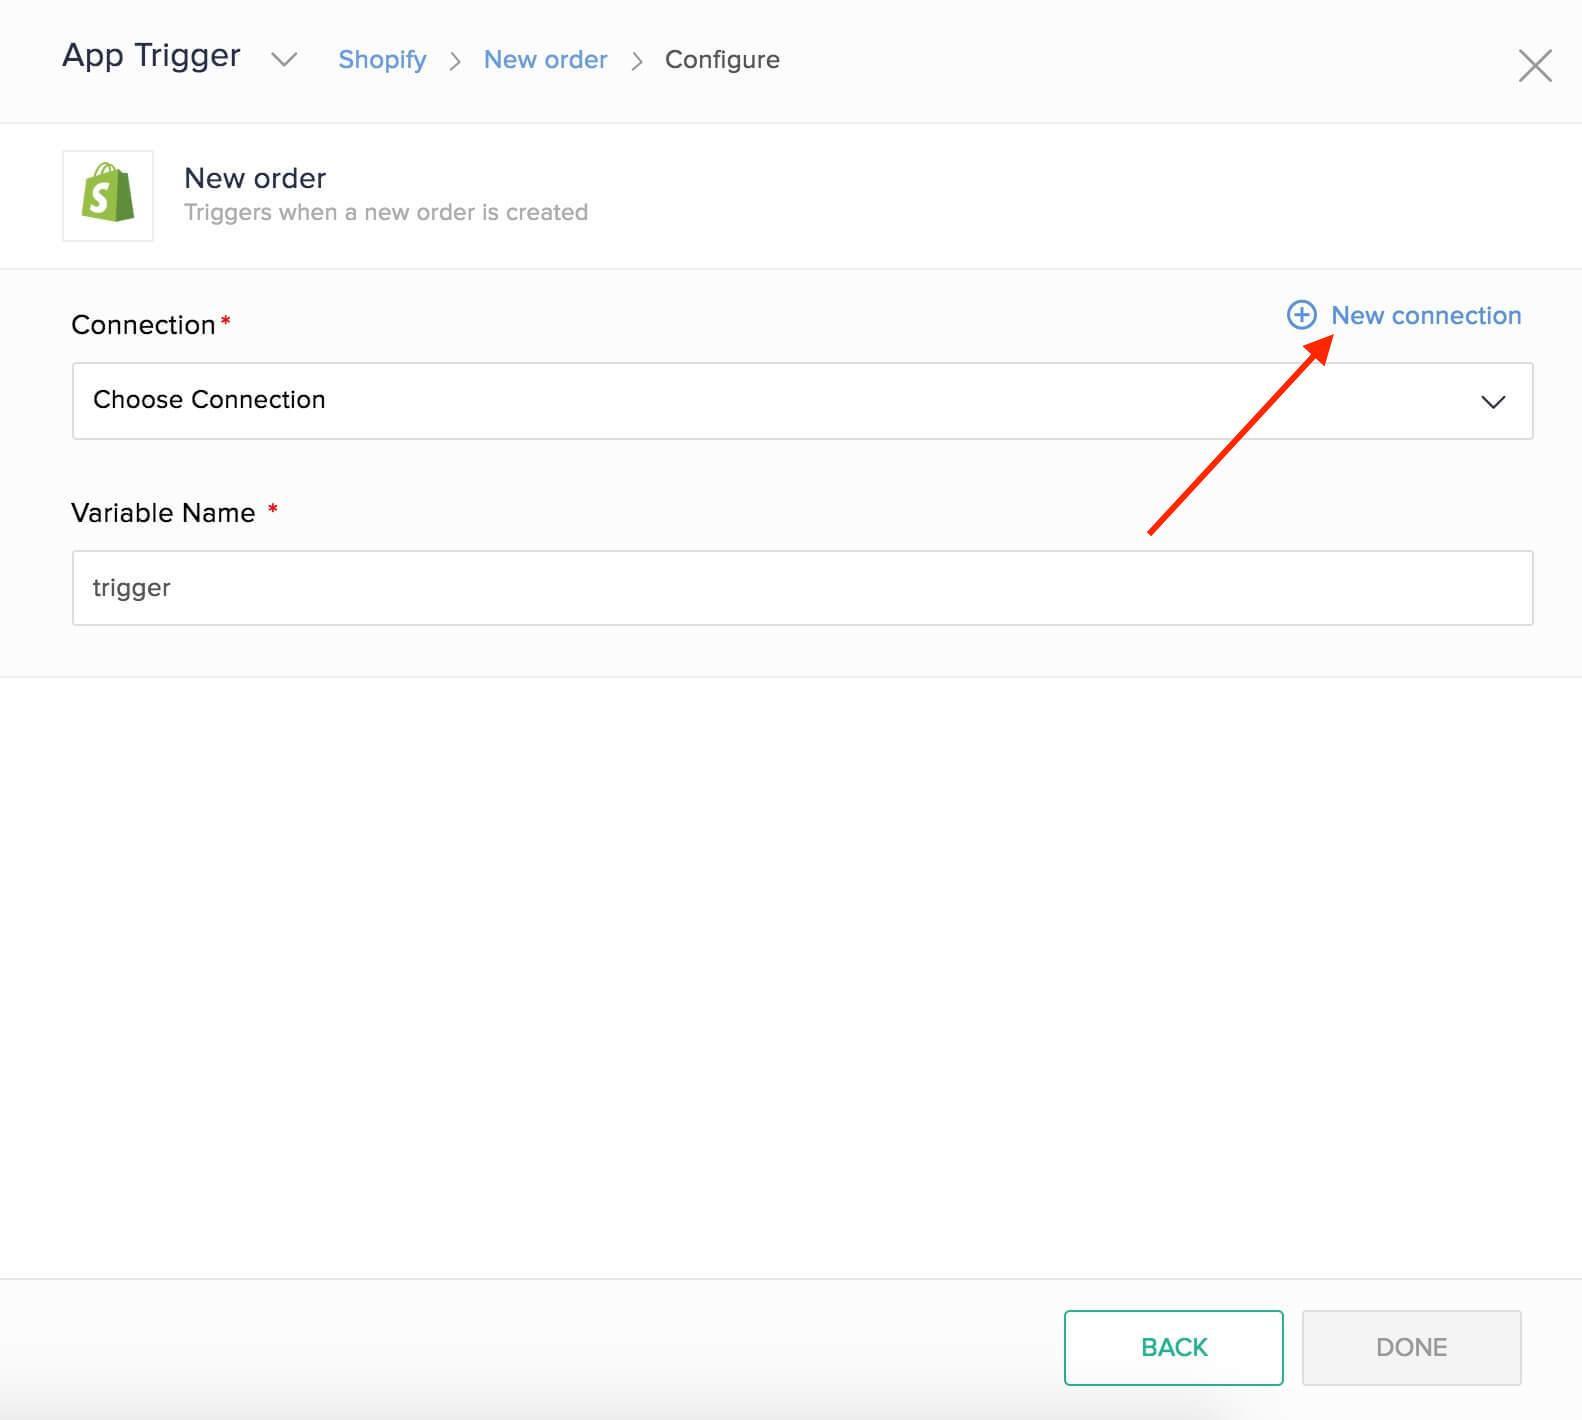 Zoho Shopify Integration: New Connection Button